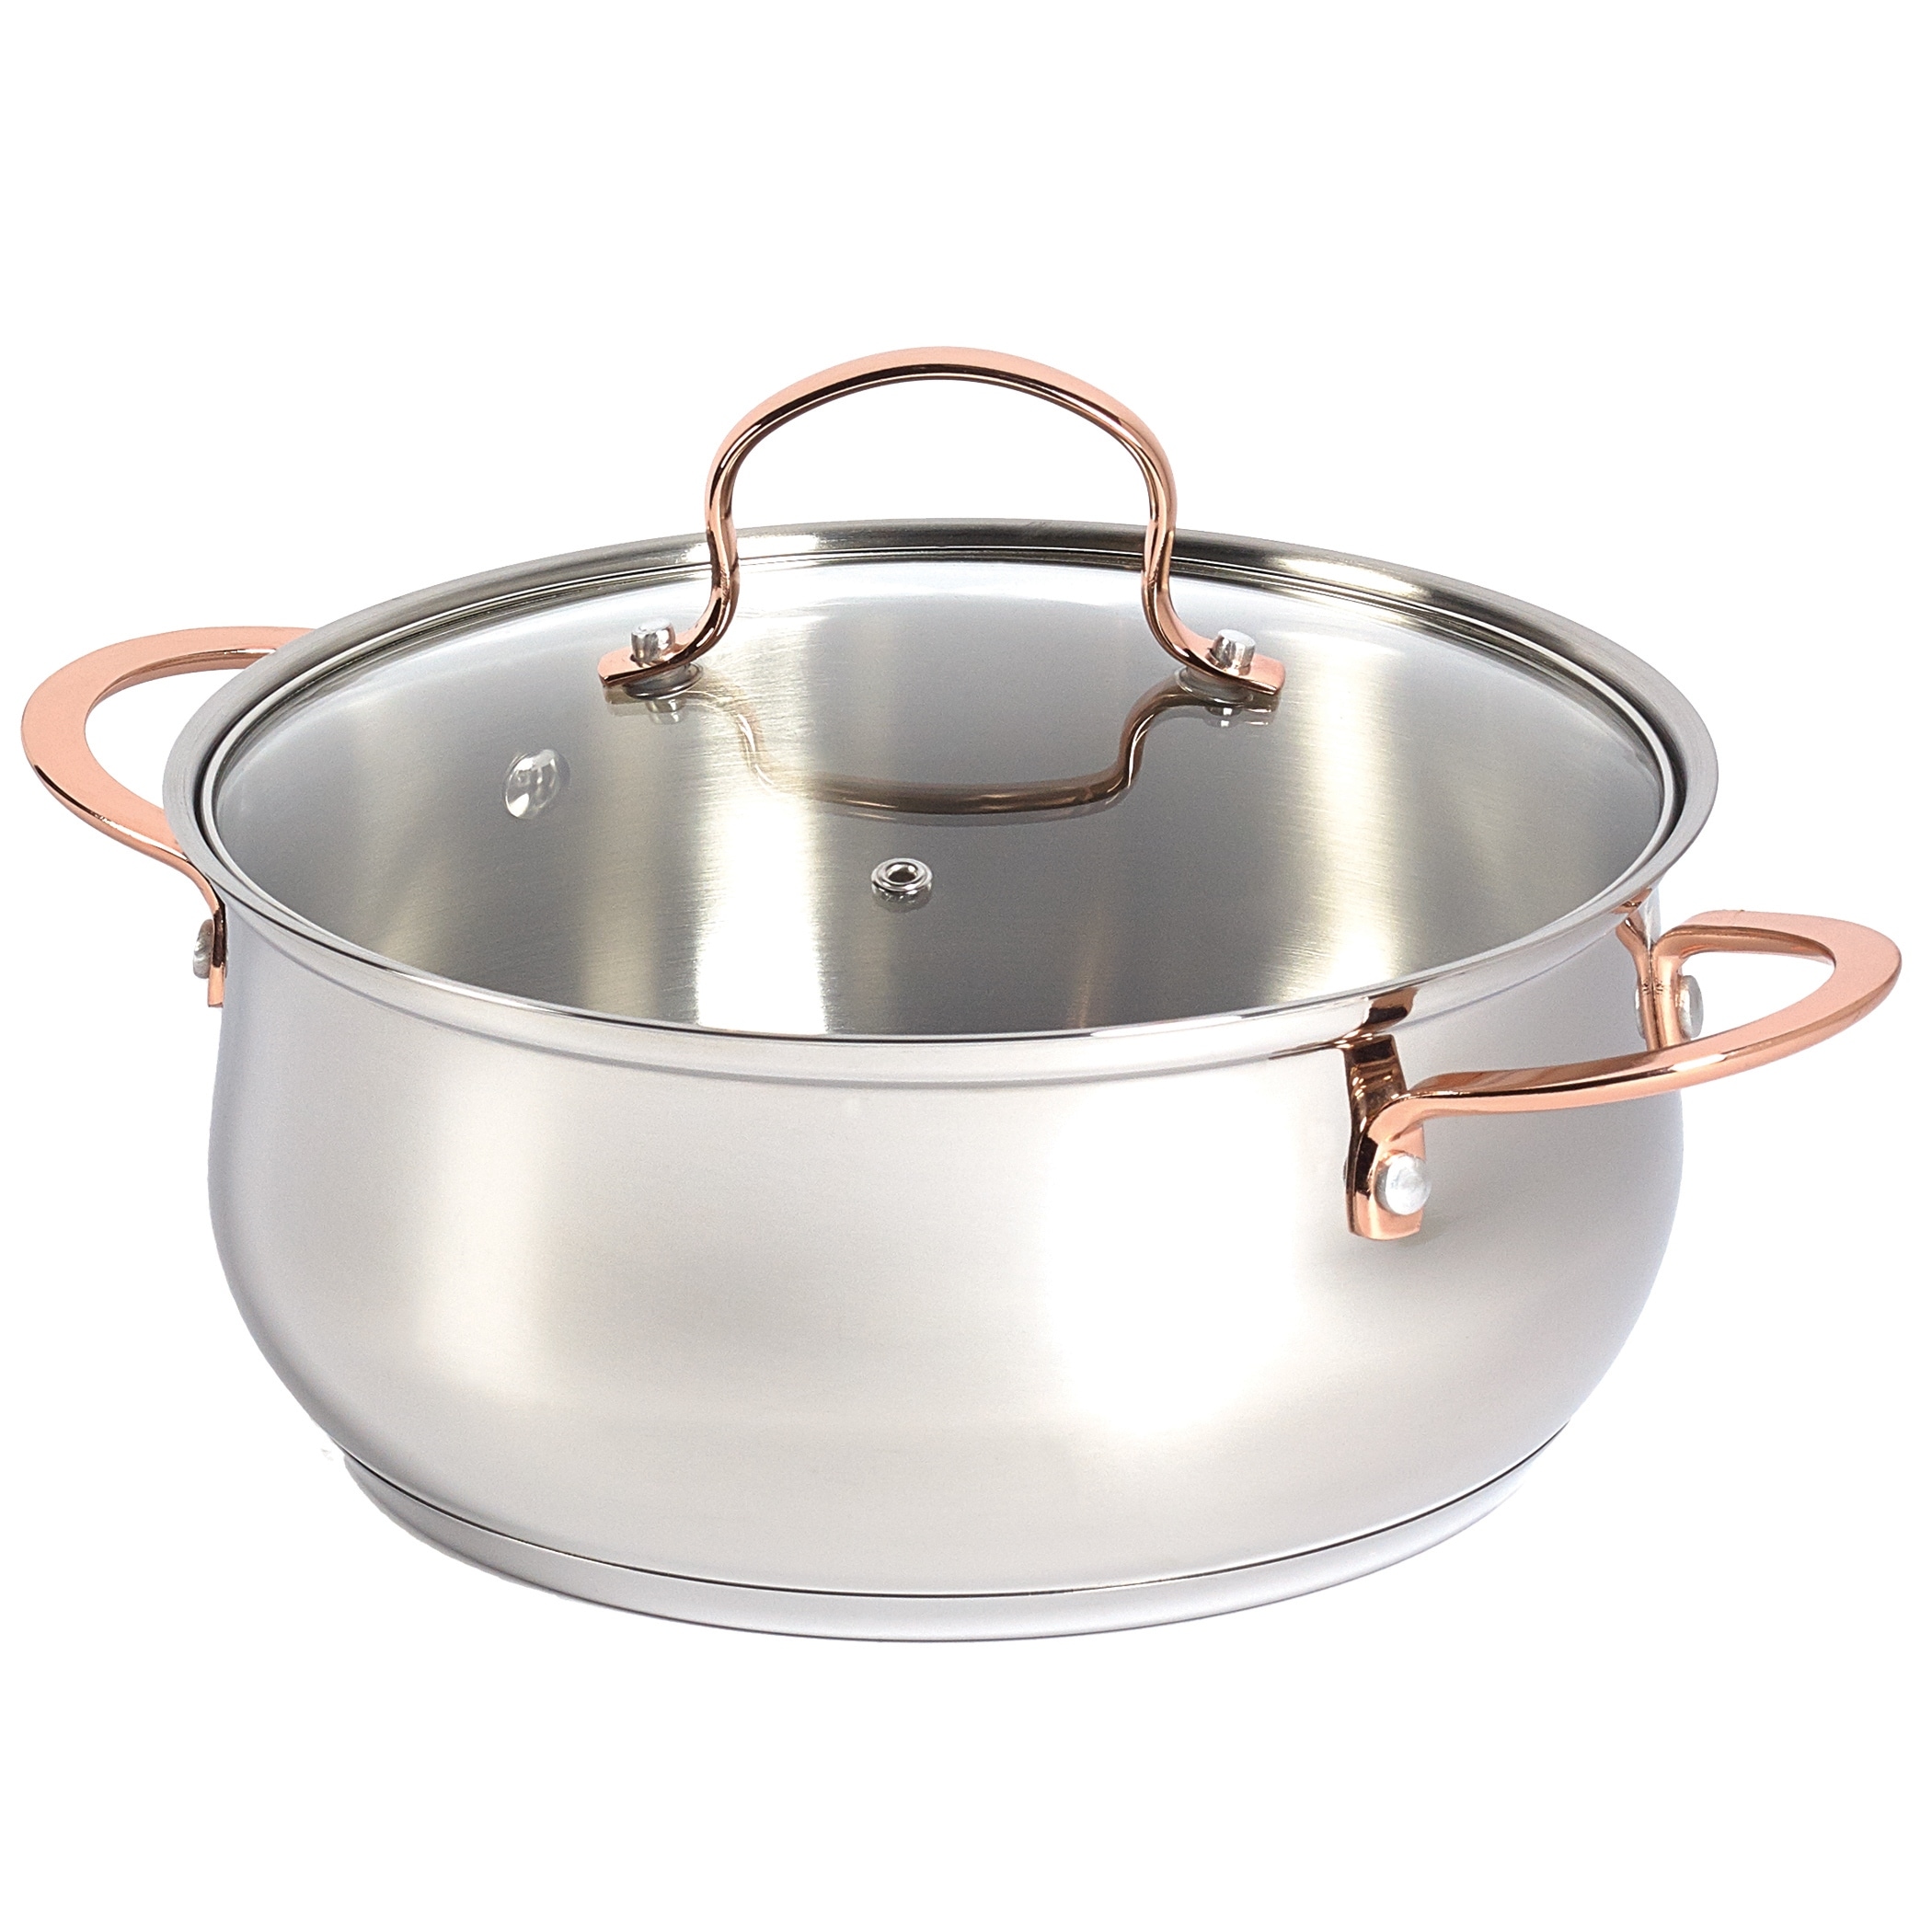 https://ak1.ostkcdn.com/images/products/is/images/direct/d3d0d73c207f5dd0c827b586320dbf9bea18c9c1/Denmark-10PC-Stainless-Steel-Cookware-Set.jpg